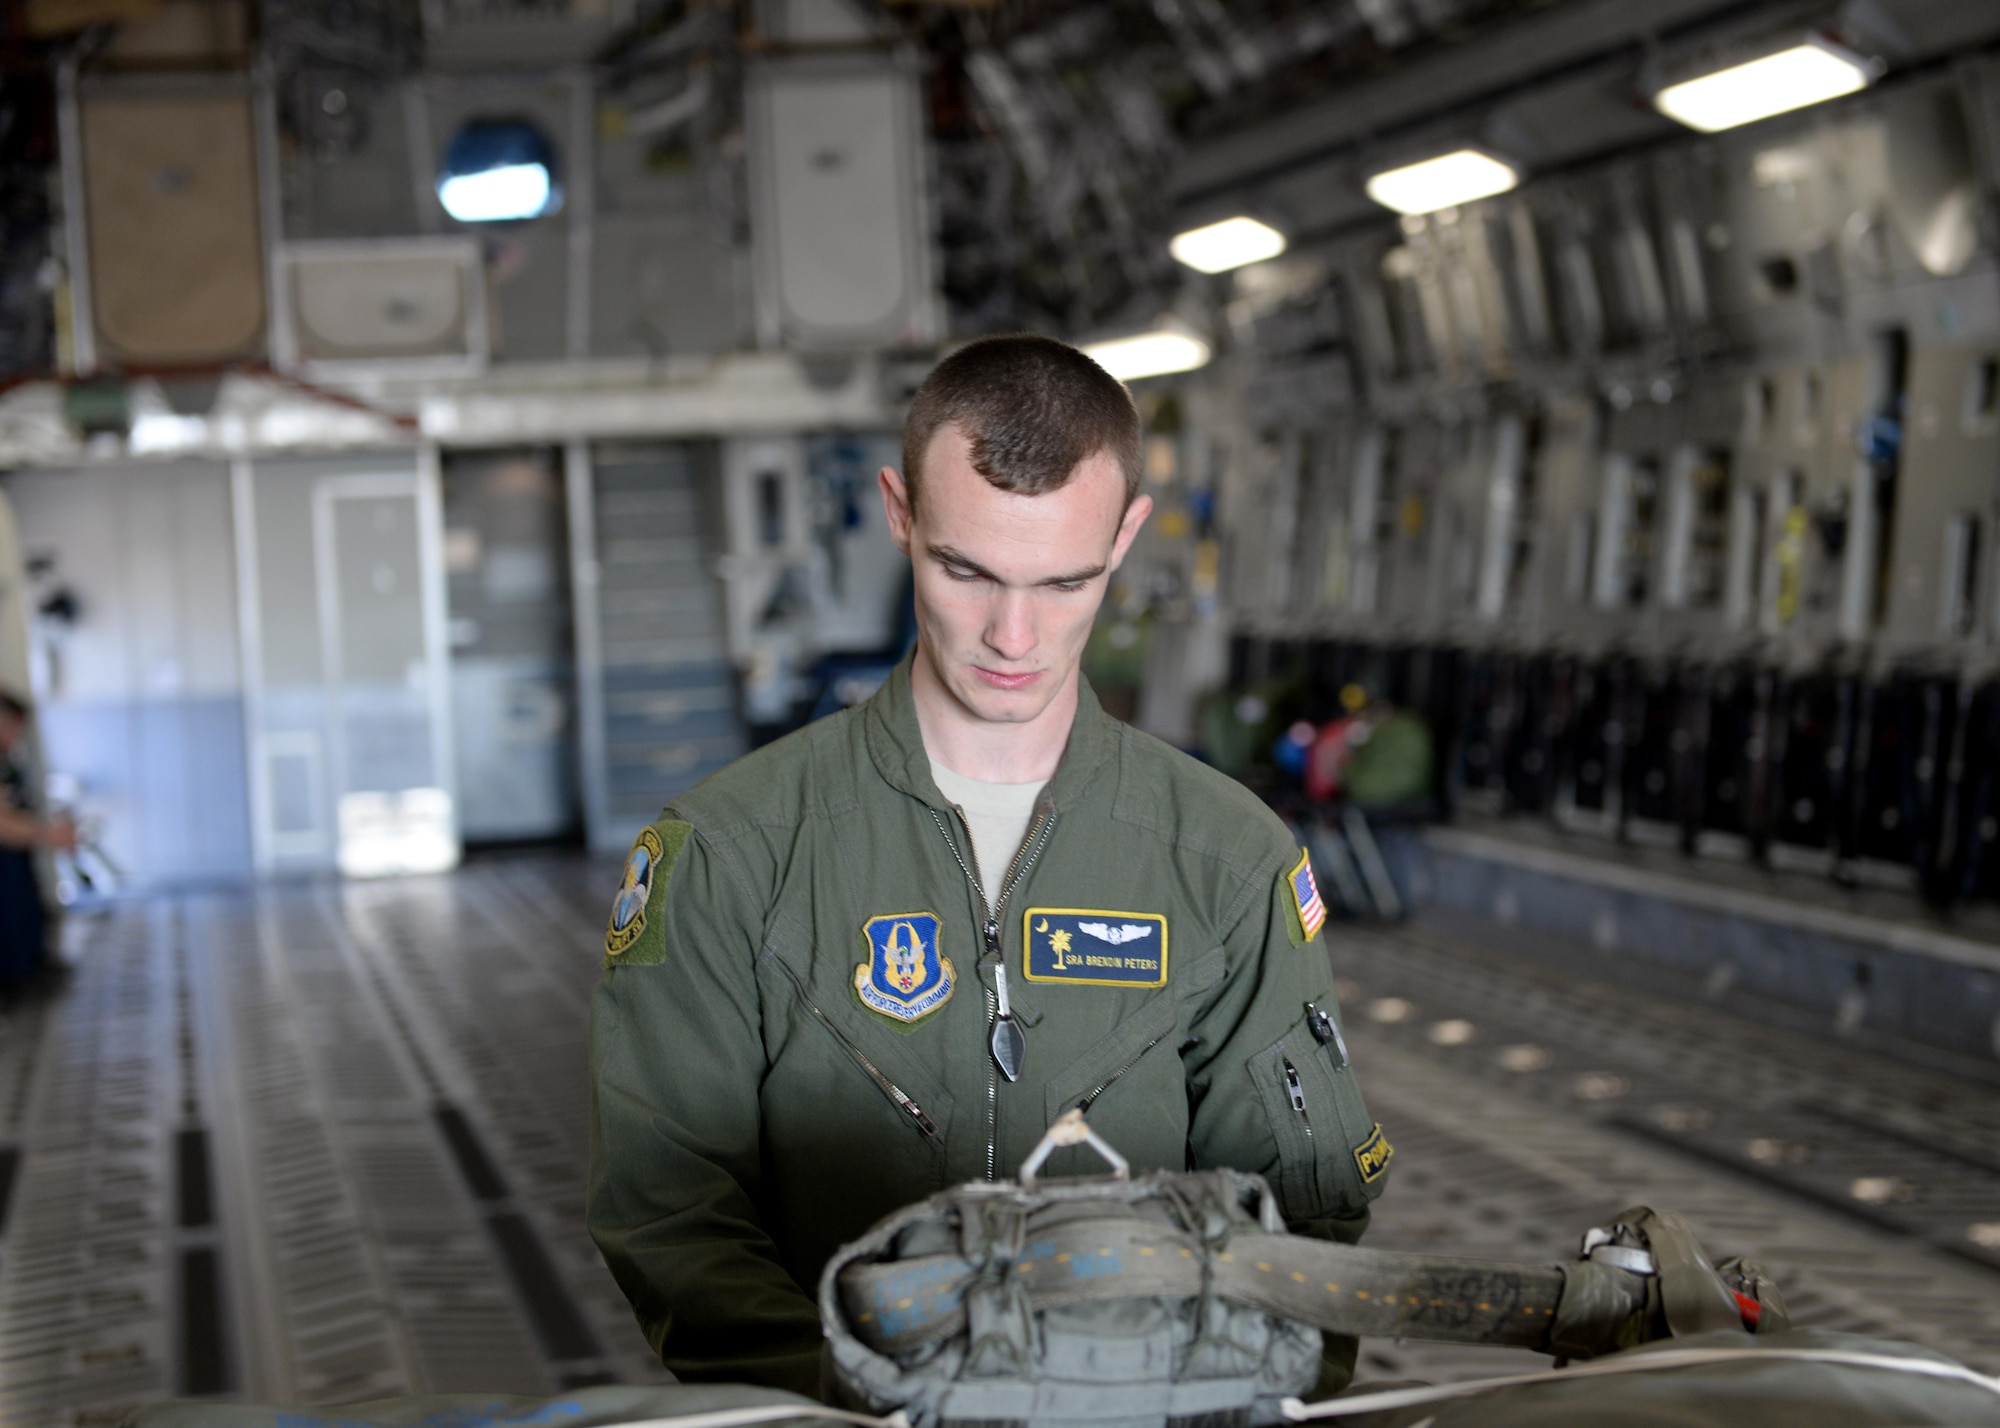 U.S. Air Force Senior Airman Brendin Peters, 317th Airlift Squadron loadmaster, secures a cargo training pallet on a U.S. Air Force C-17 Globemaster III cargo aircraft, March 17, 2017, Altus Air Force Base, Oklahoma. Brendin Peters participated in a refueling training mission where his crew’s C-17 was refueled by a U.S. Air Force KC-135 Stratotanker refueling aircraft piloted by his father U.S. Air Force Col. Craig Peters, 940th Air Refueling Wing commander. (U.S. Air Force photo by Airman 1st Class Jackson N. Haddon/Released)